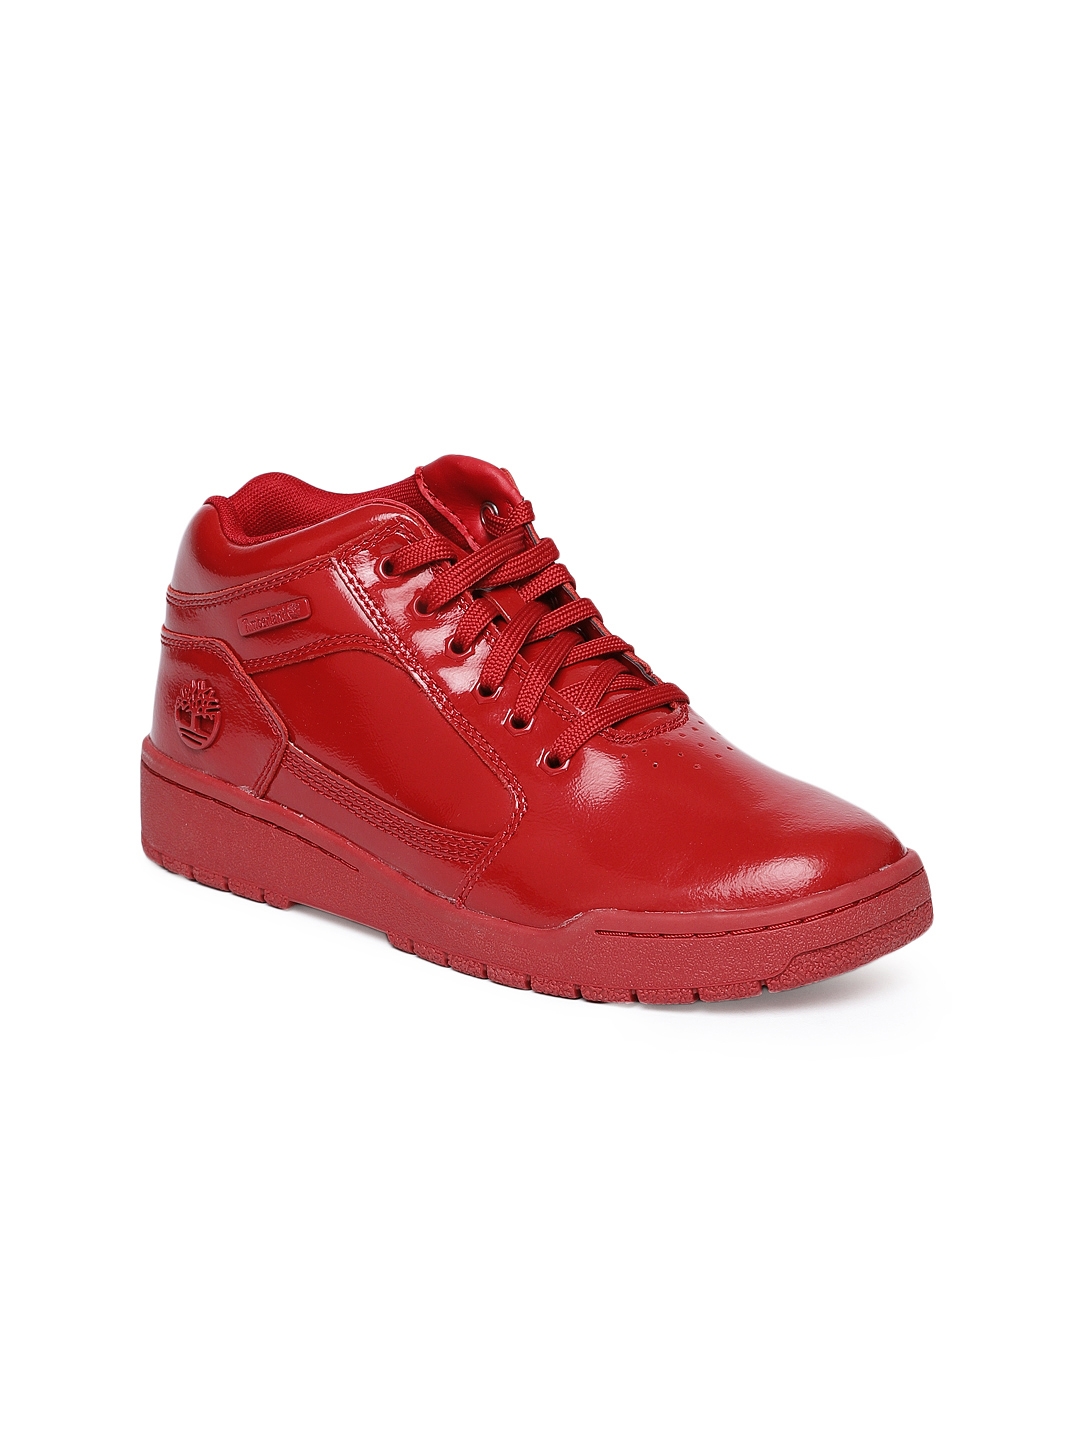 timberland red shoes